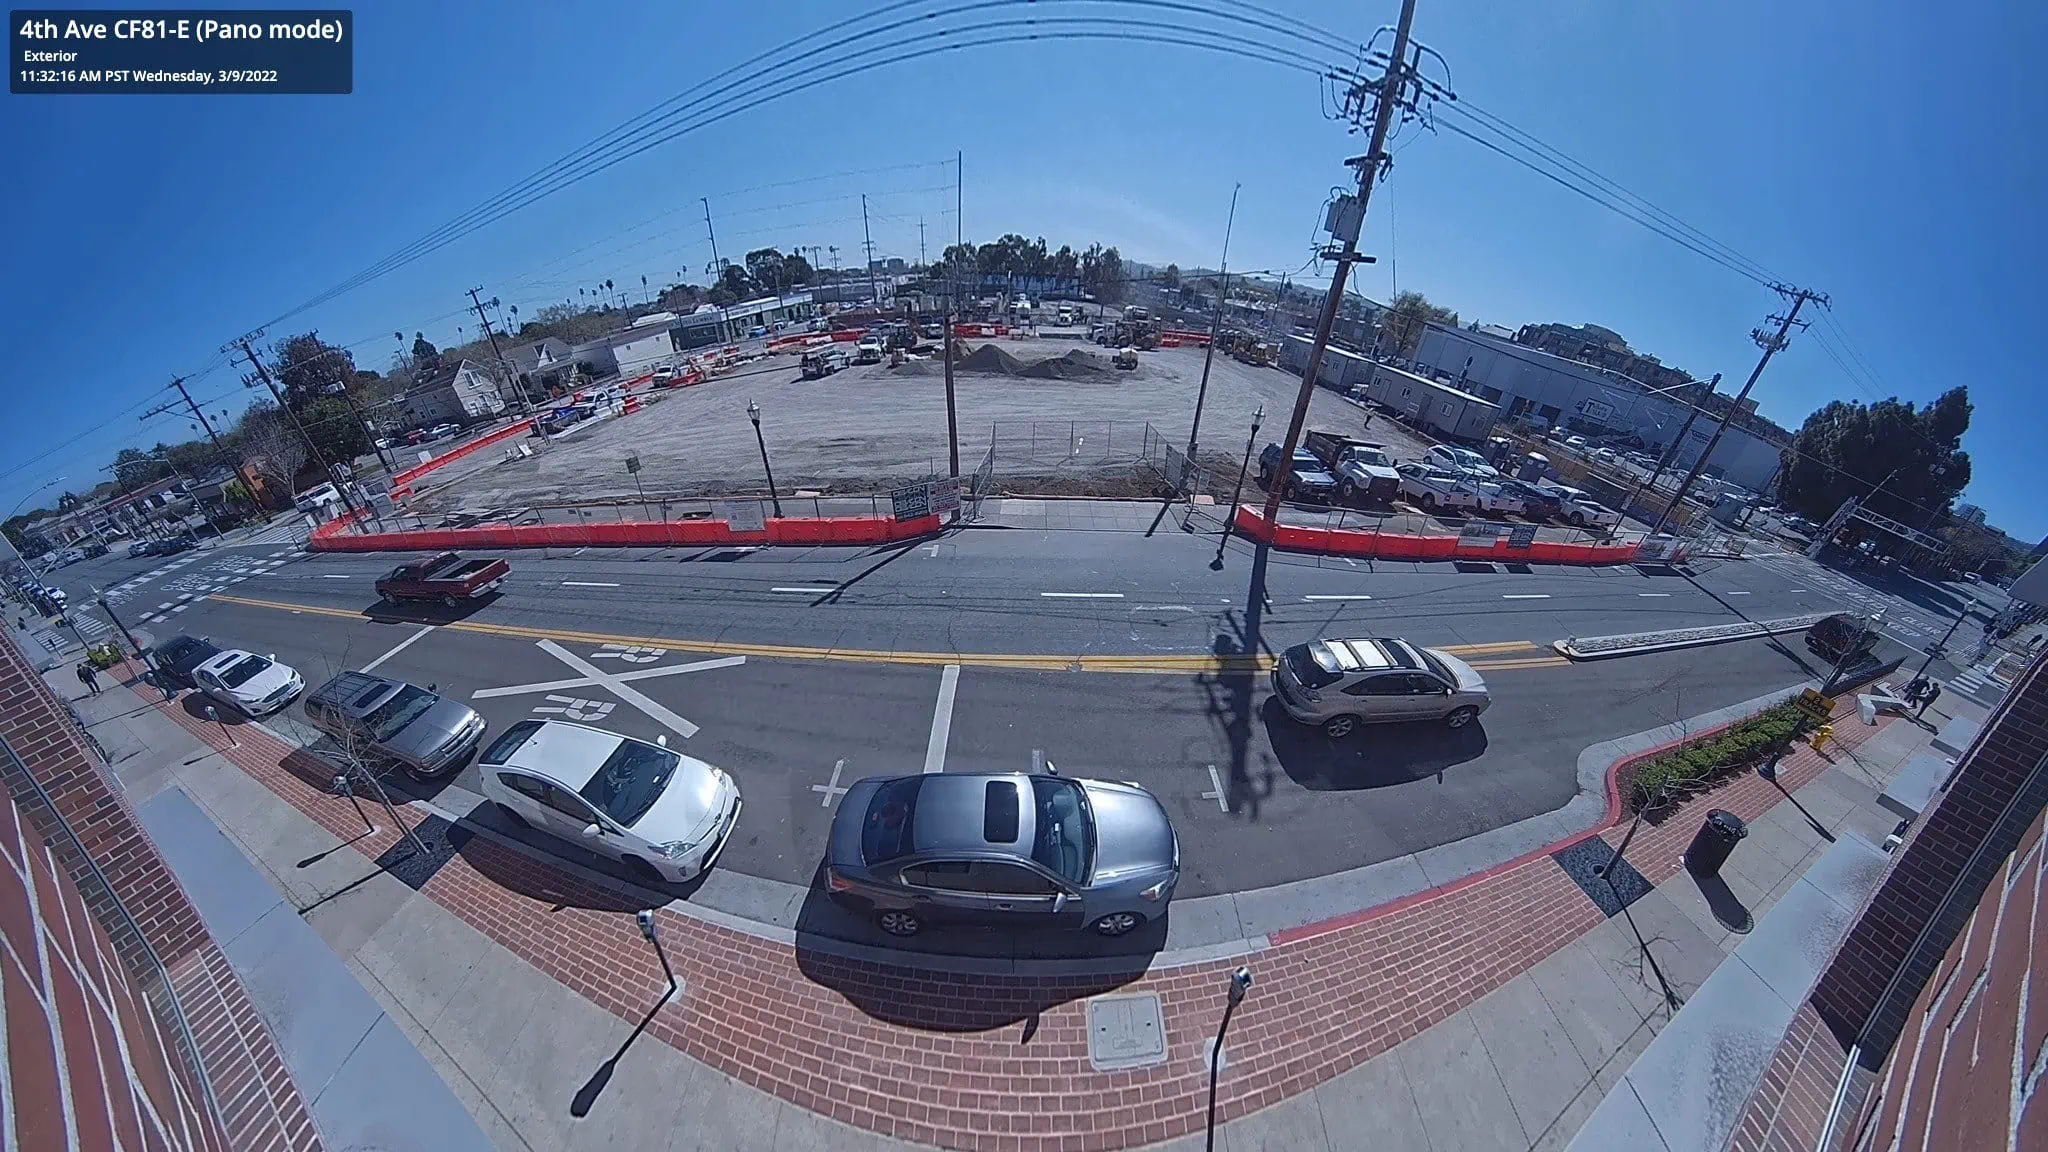 Panoramic mode of the Fisheye Camera for security of buildings